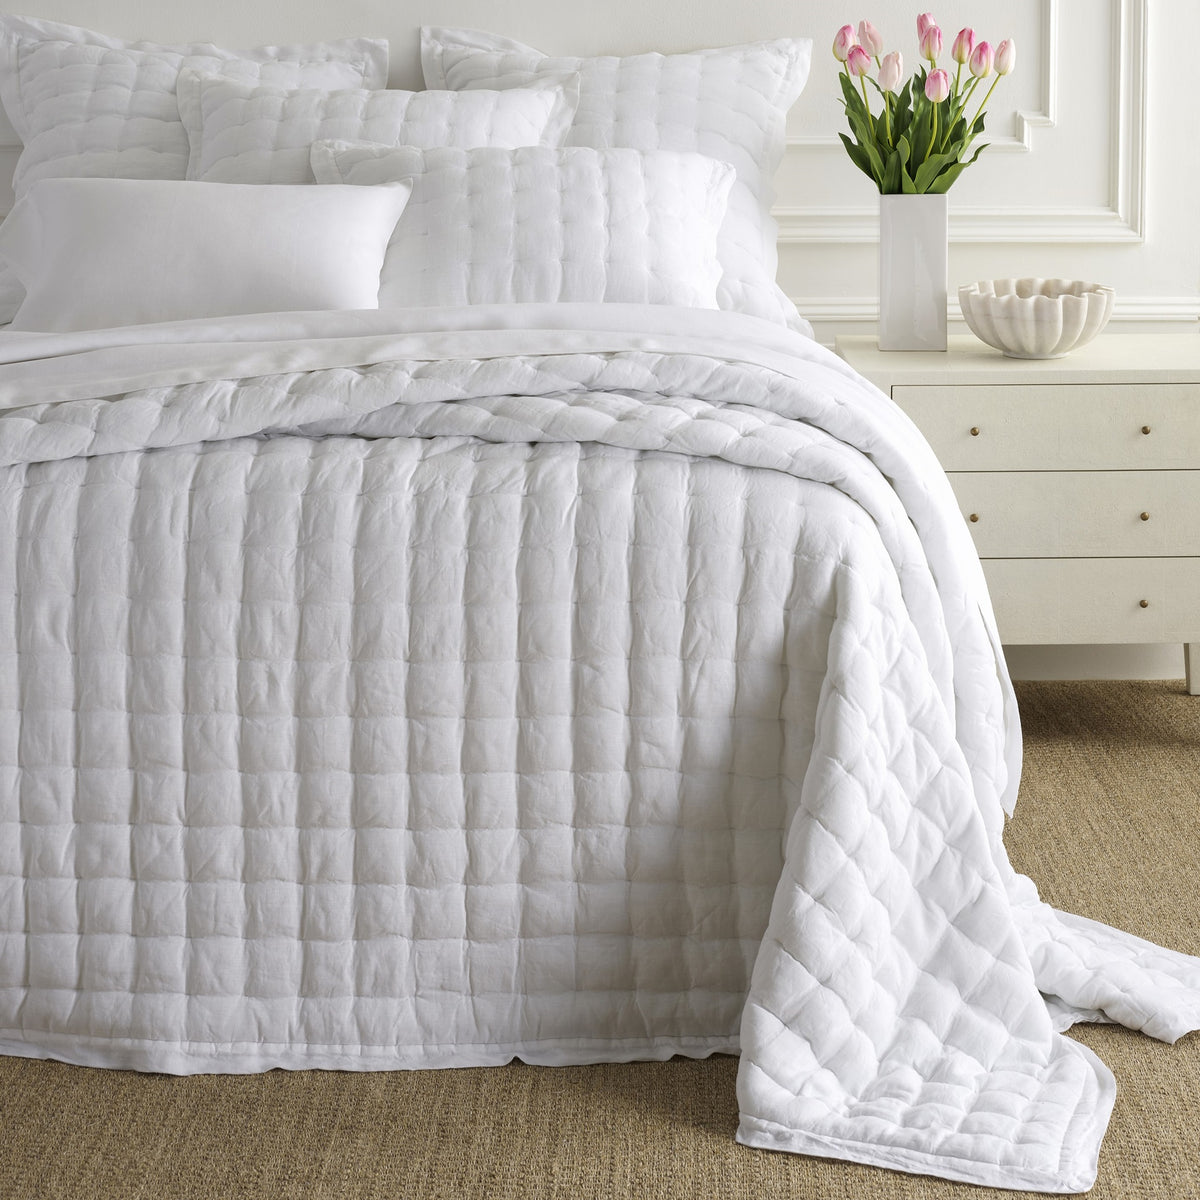 Bed Dressed in Pine Cone Hill Lush Linen Puff in Color White